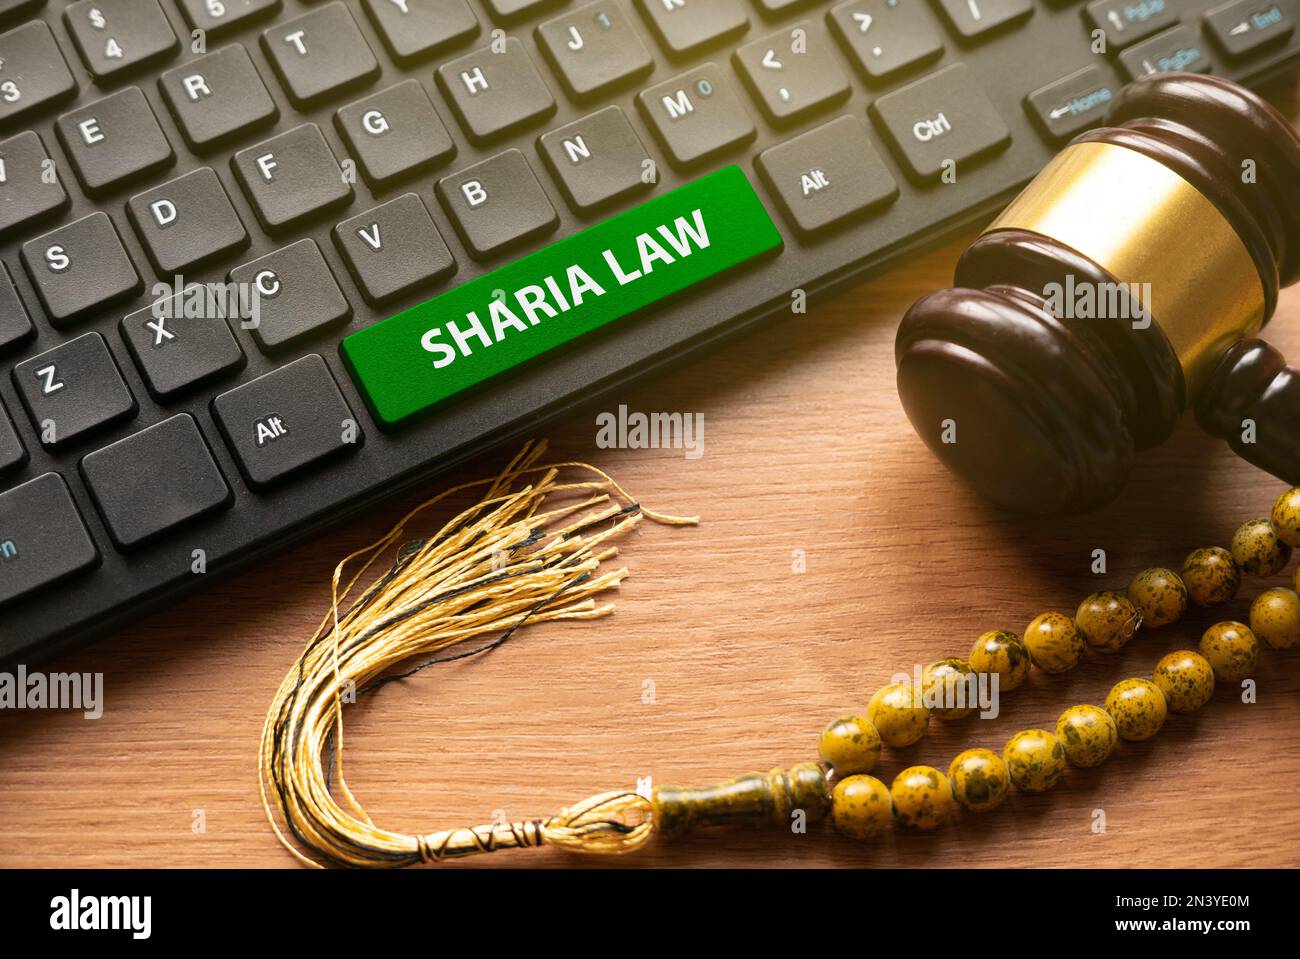 Gavel, rosary beads and computer keyboard written with Sharia Law. Stock Photo